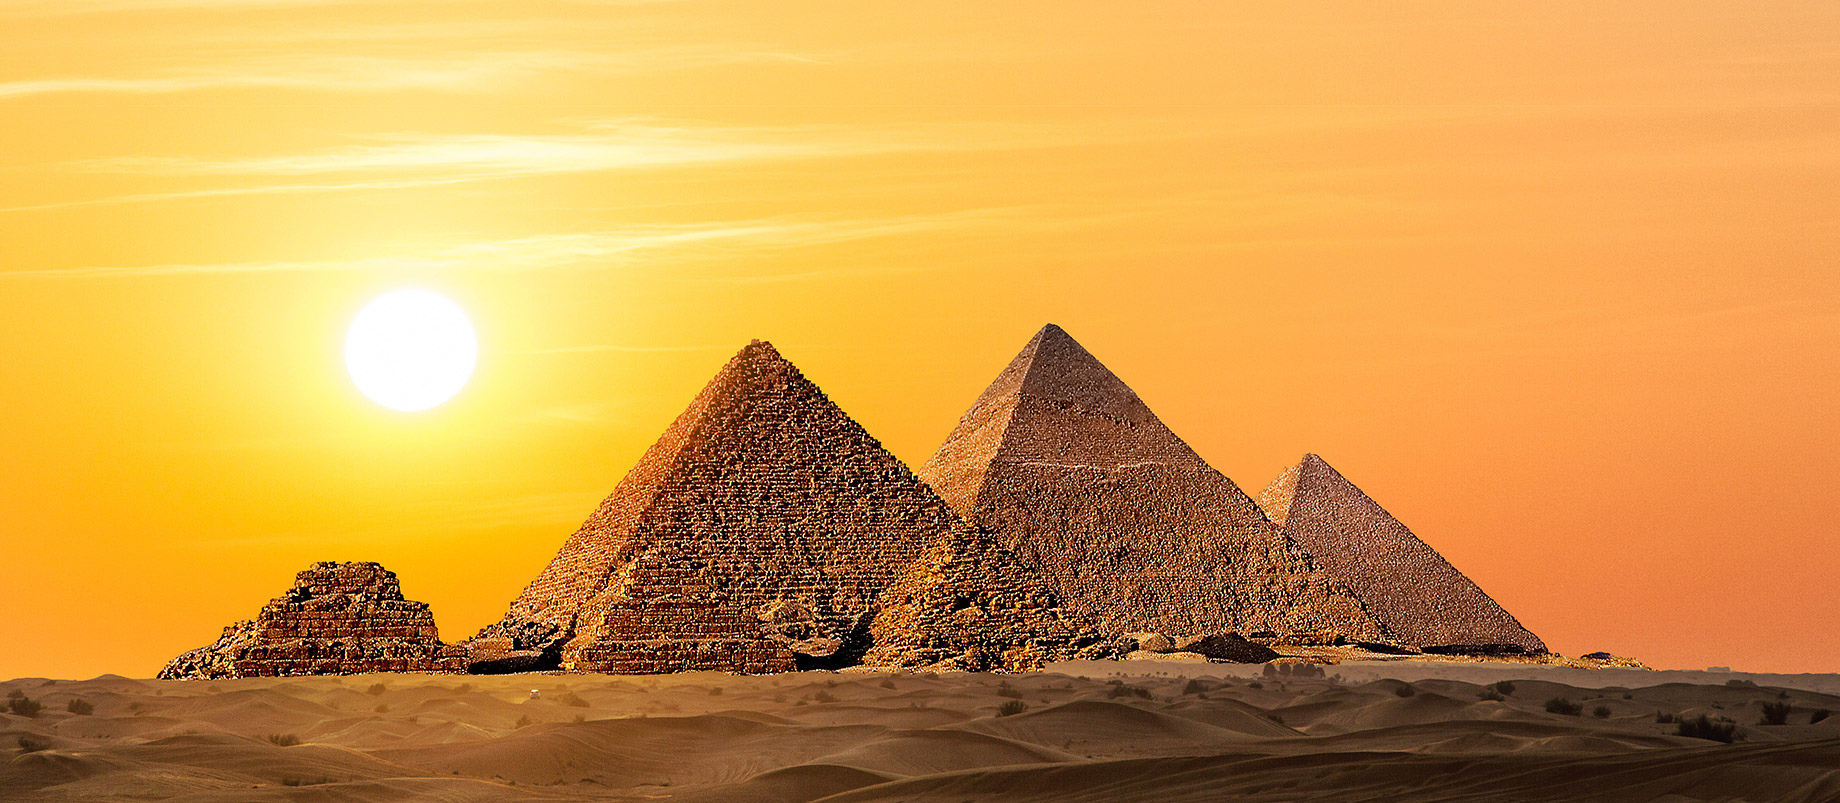 The Great Pyramids of Giza - Sunset in Egypt